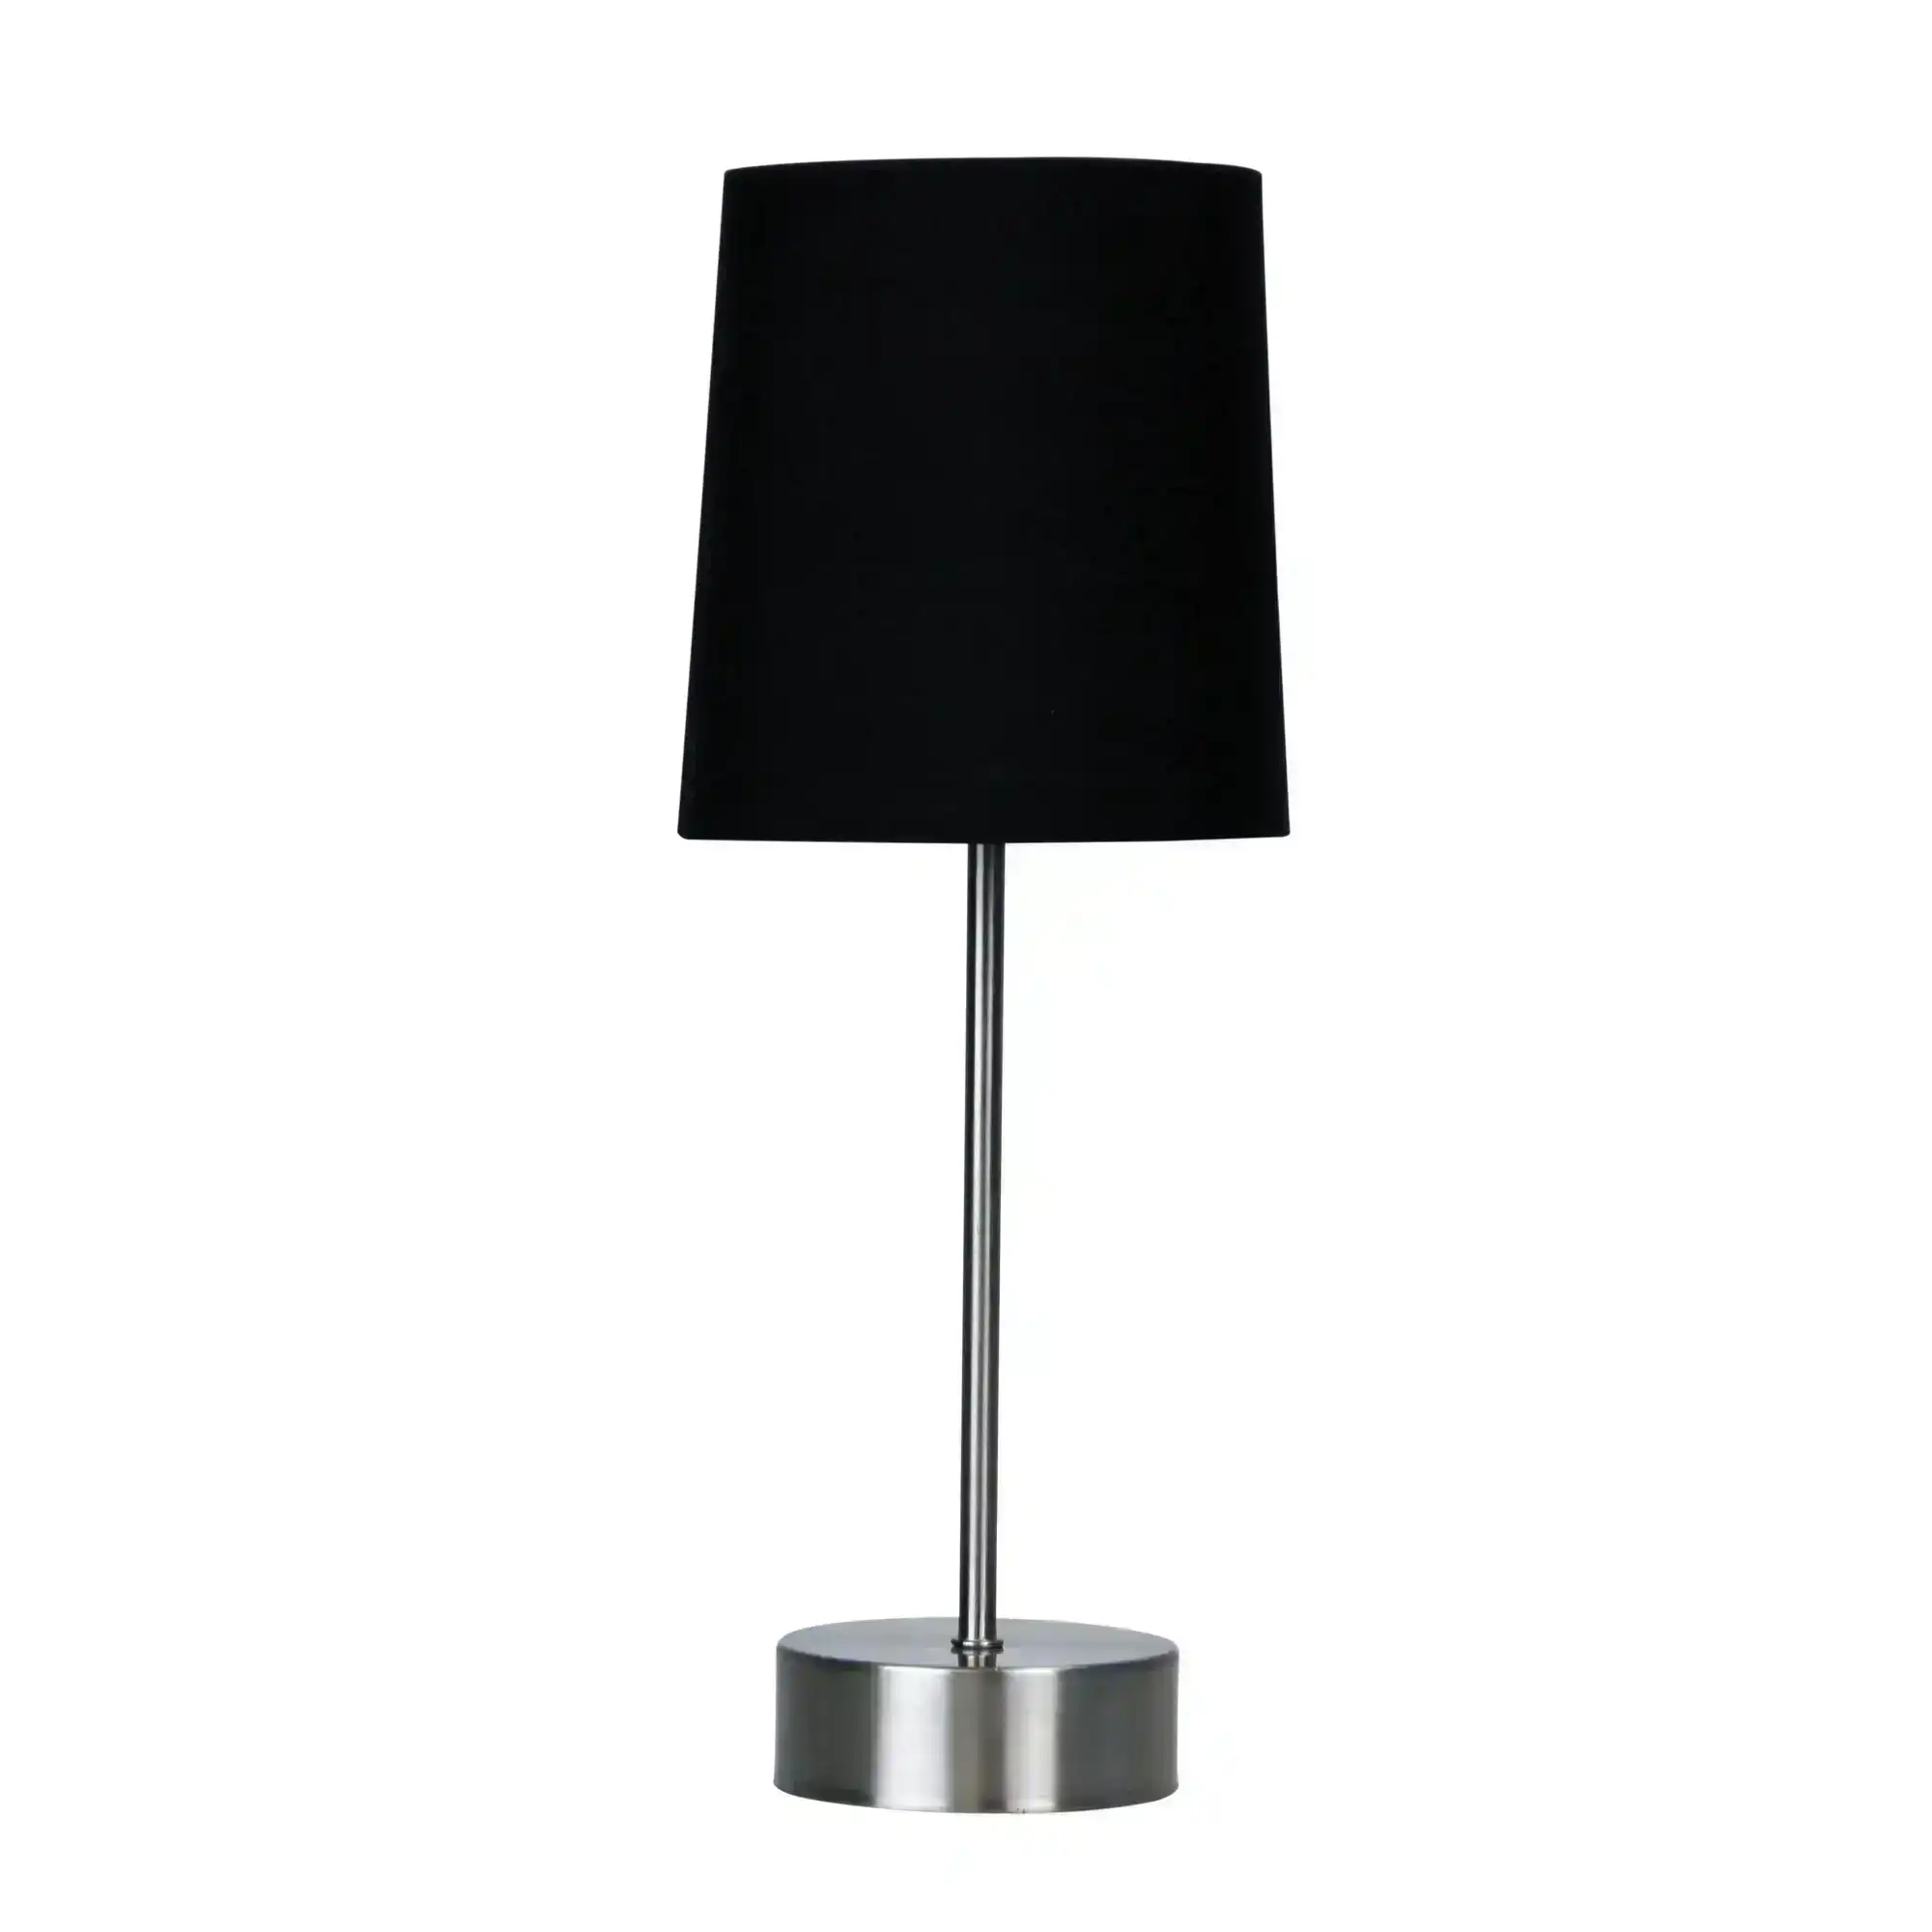 Lancet ON-OFF Touch Lamp Black Shade